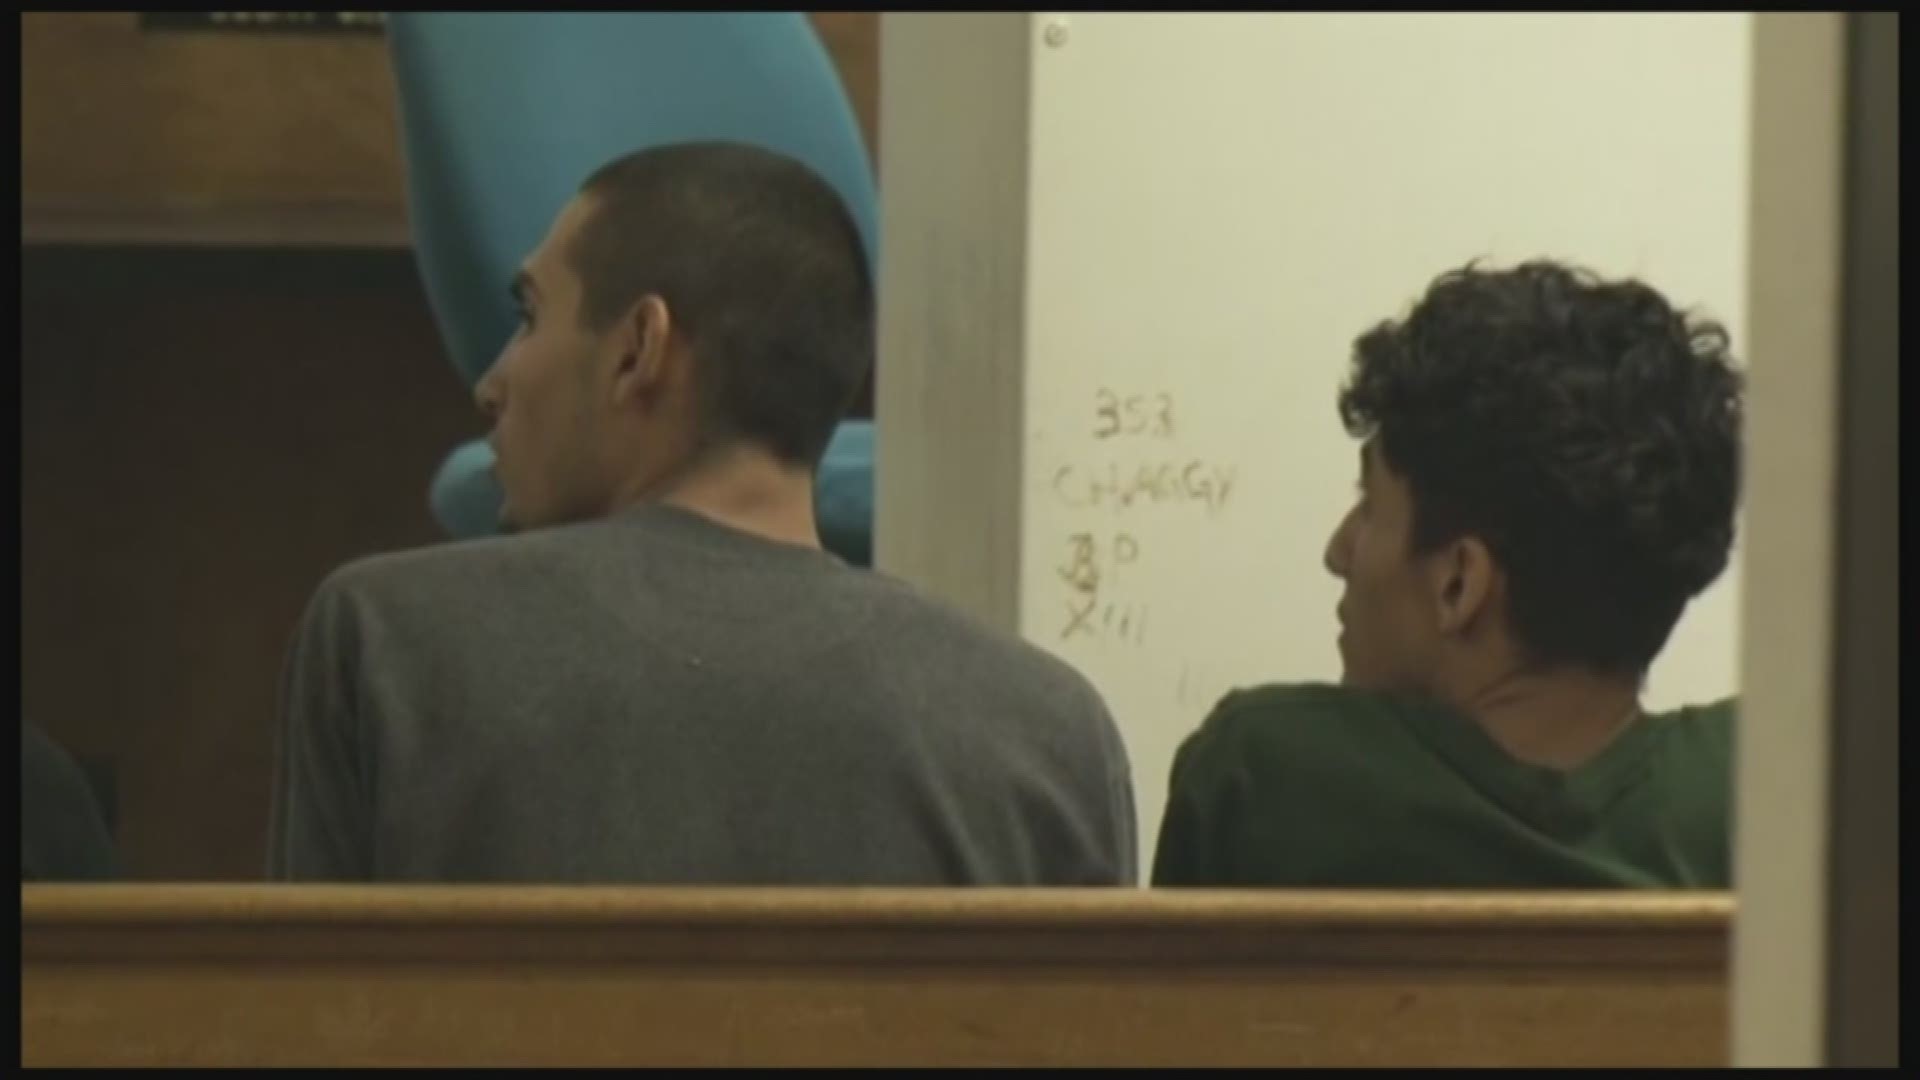 A pair of Salvadorian immigrants in the country illegally are accused of a horrifying series of crimes. The pair, alleged members of the violent MS-13 gang, are accused of kidnapping and raping a 14-year-old girl and killing an older girl known as "Genesi